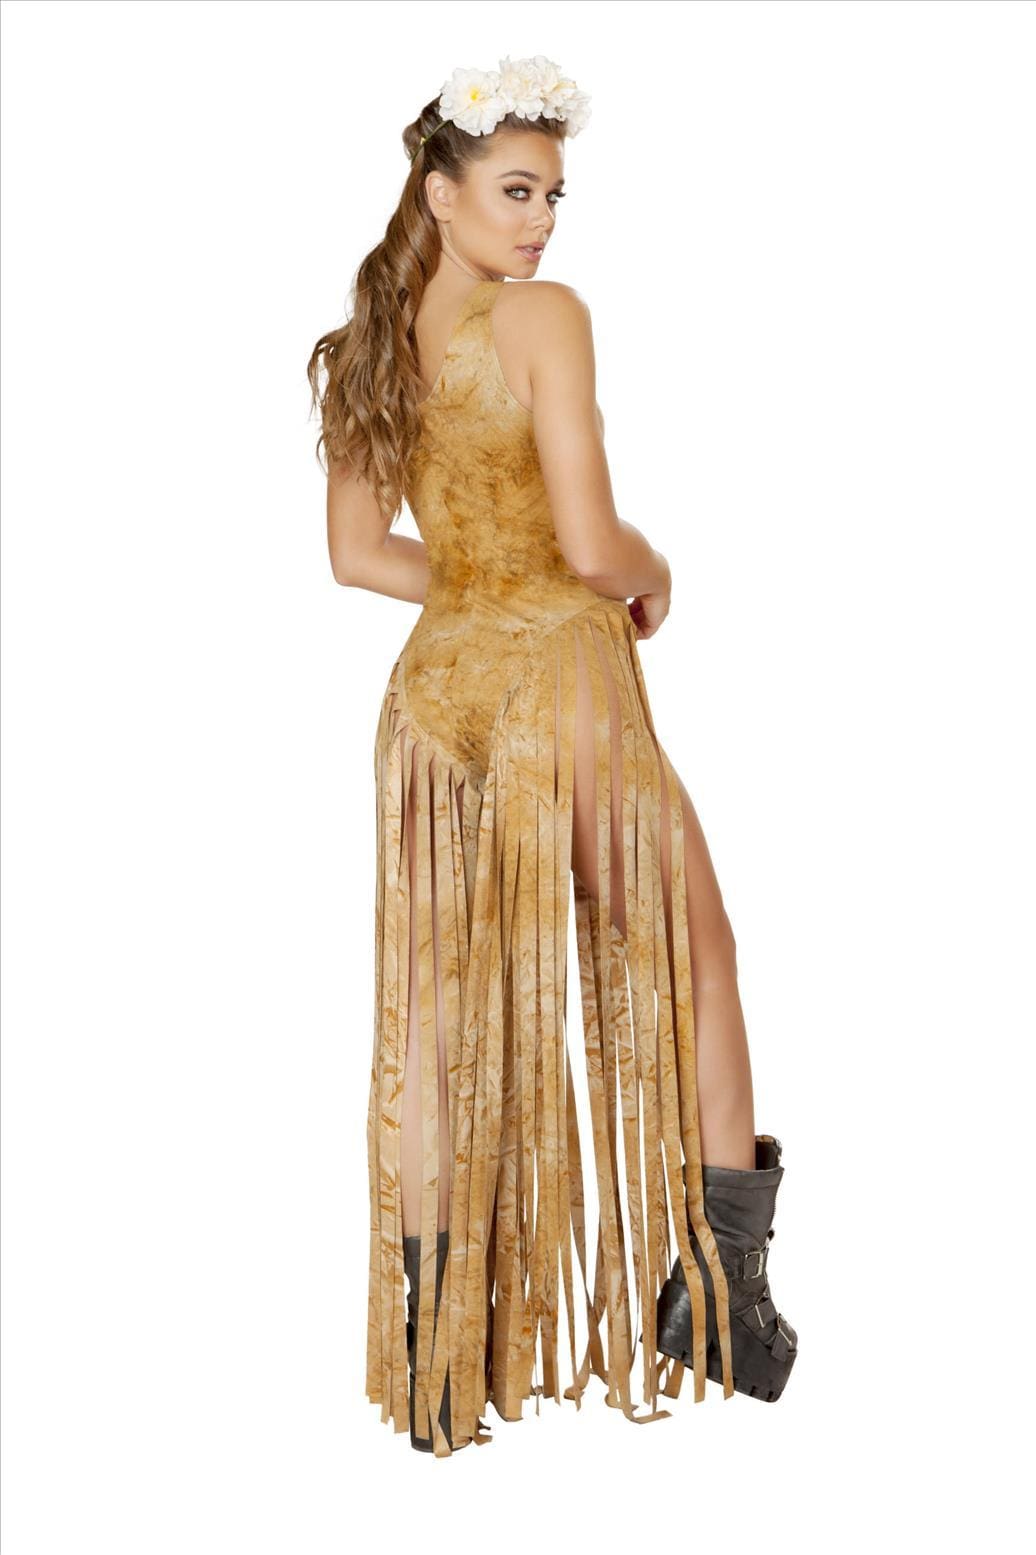 Roma S/M / Brown Brown Bodysuit with Long Fringe SHC-3536-BRN-S Apparel & Accessories > Clothing > One Pieces > Jumpsuits & Rompers